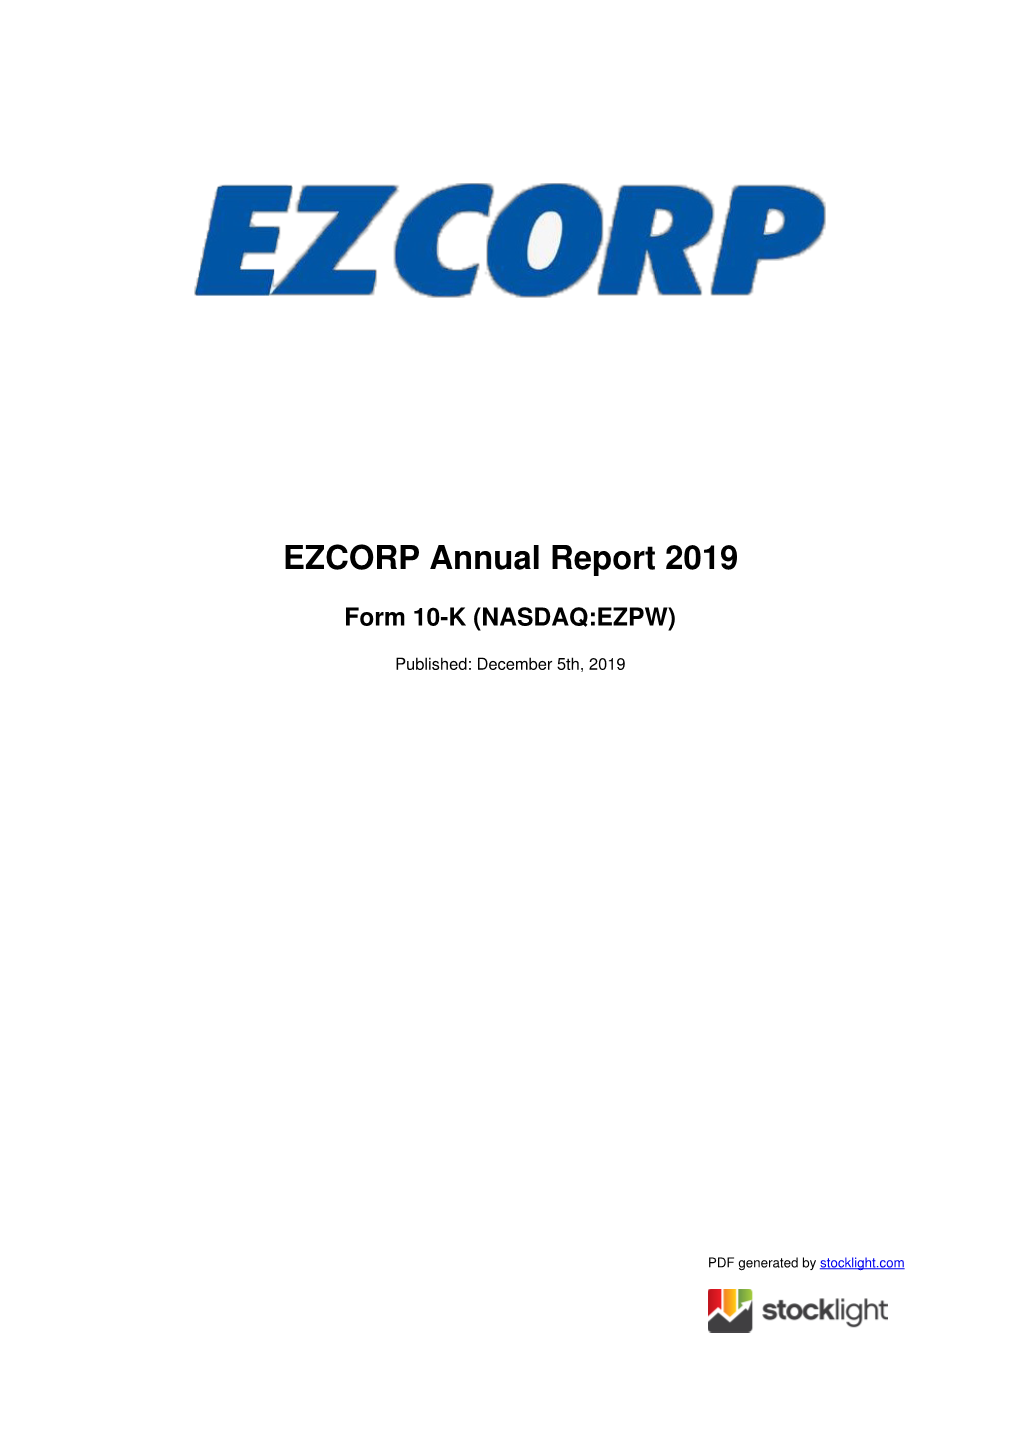 EZCORP Annual Report 2019